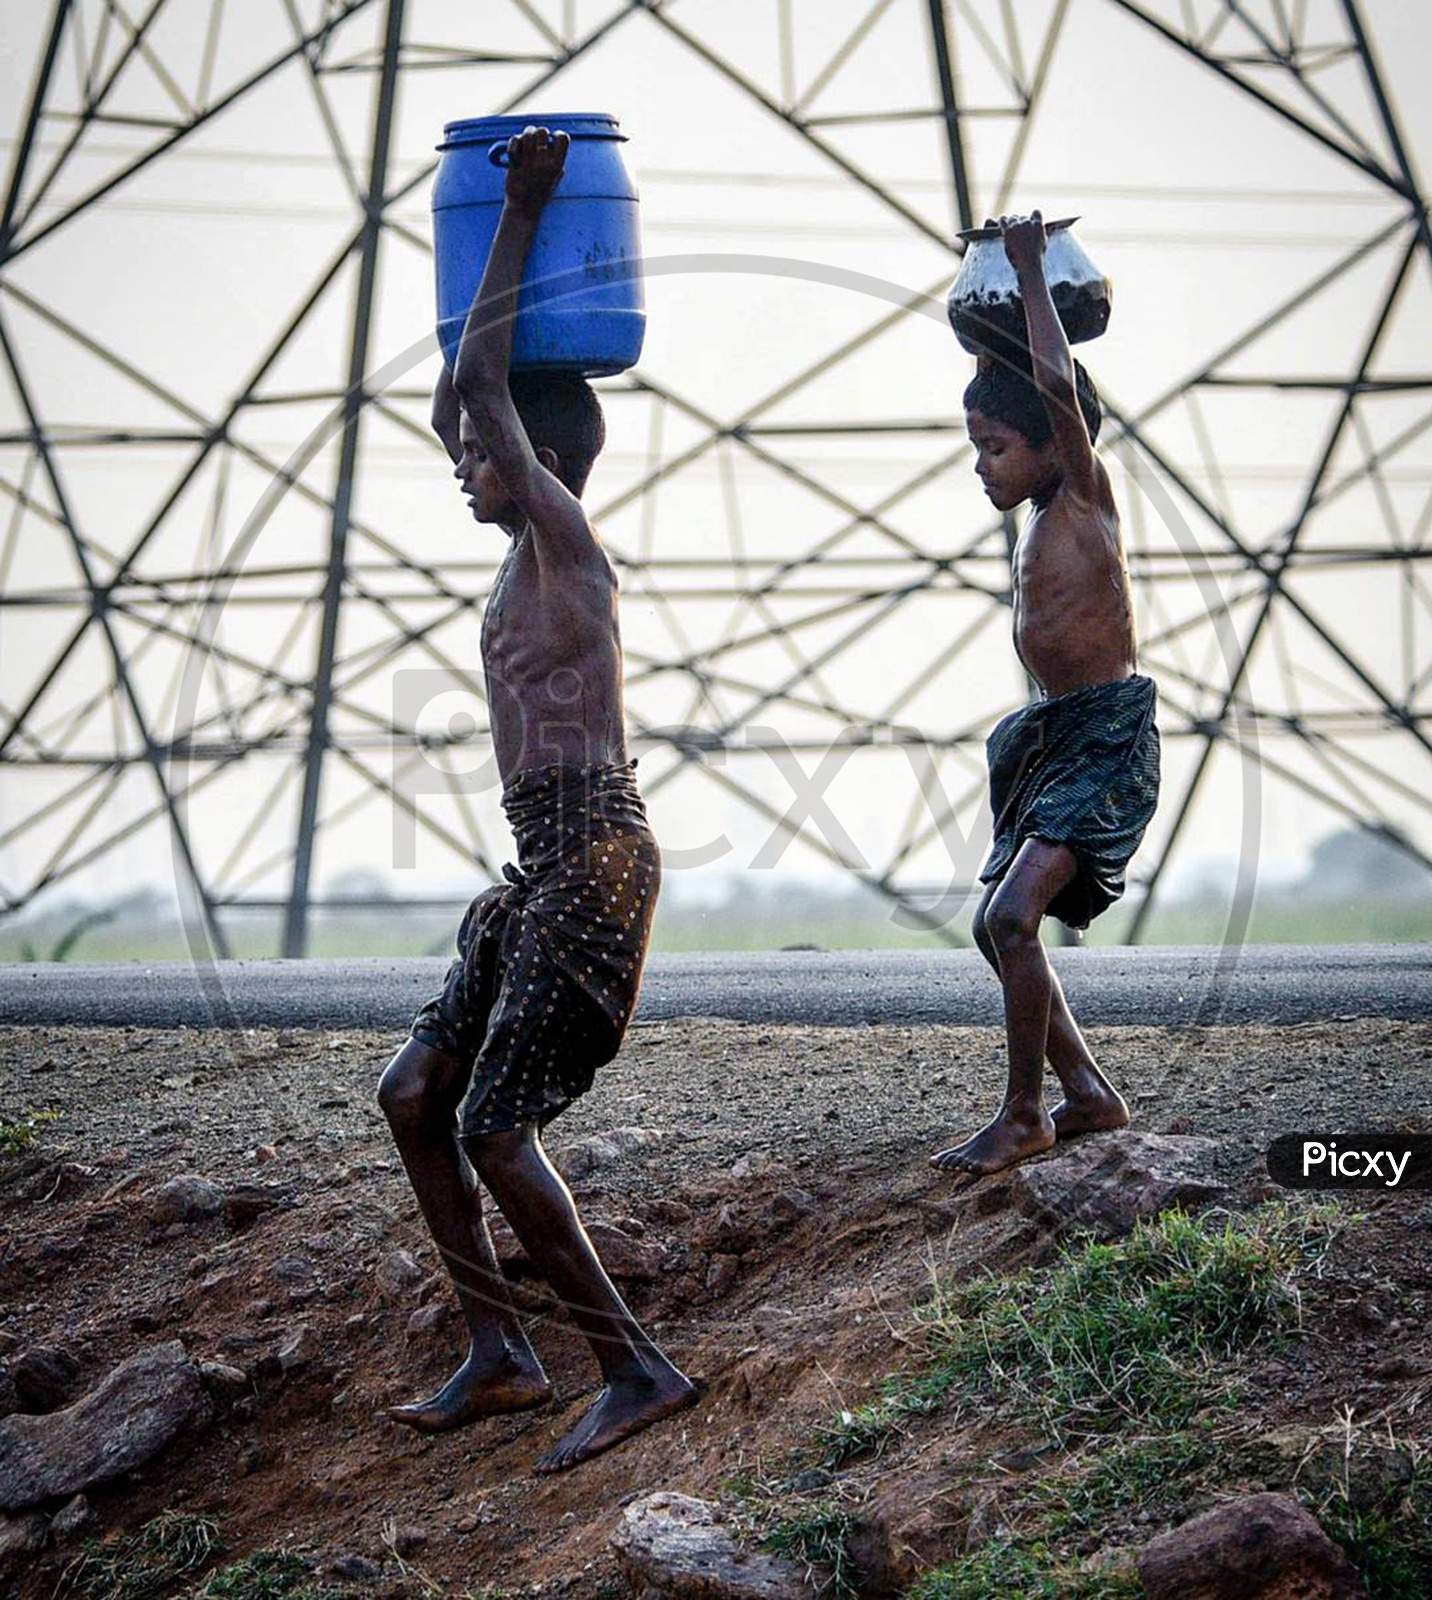 Young Indian Boys Carrying Water Vessels on Their Heads